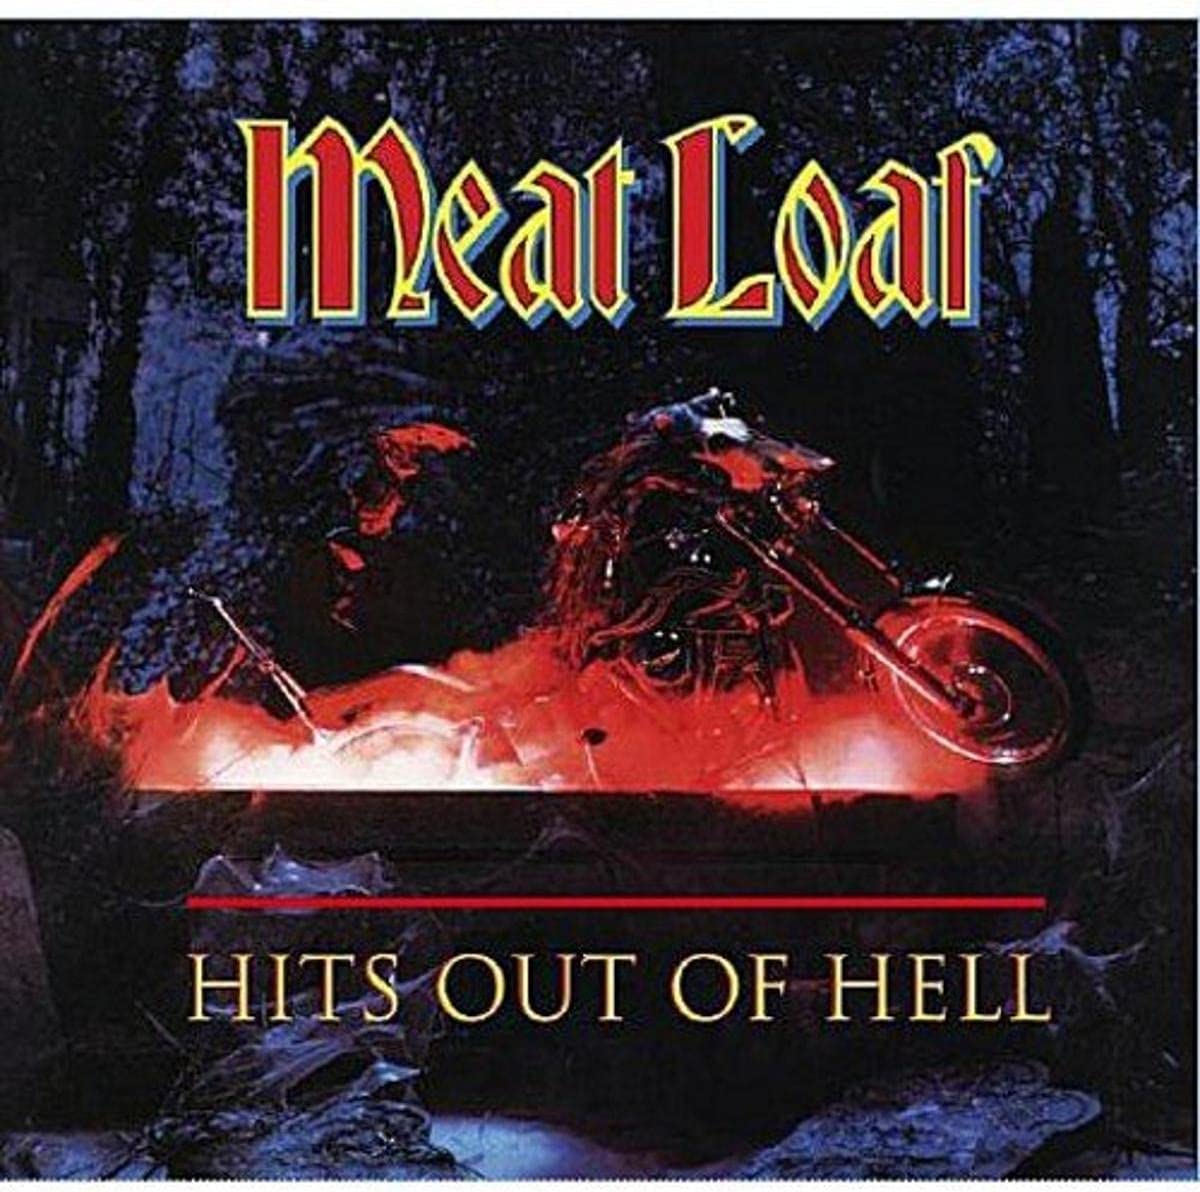 Meat Loaf - Hits out of Hell: CD ( Pre-loved & Refurbed )